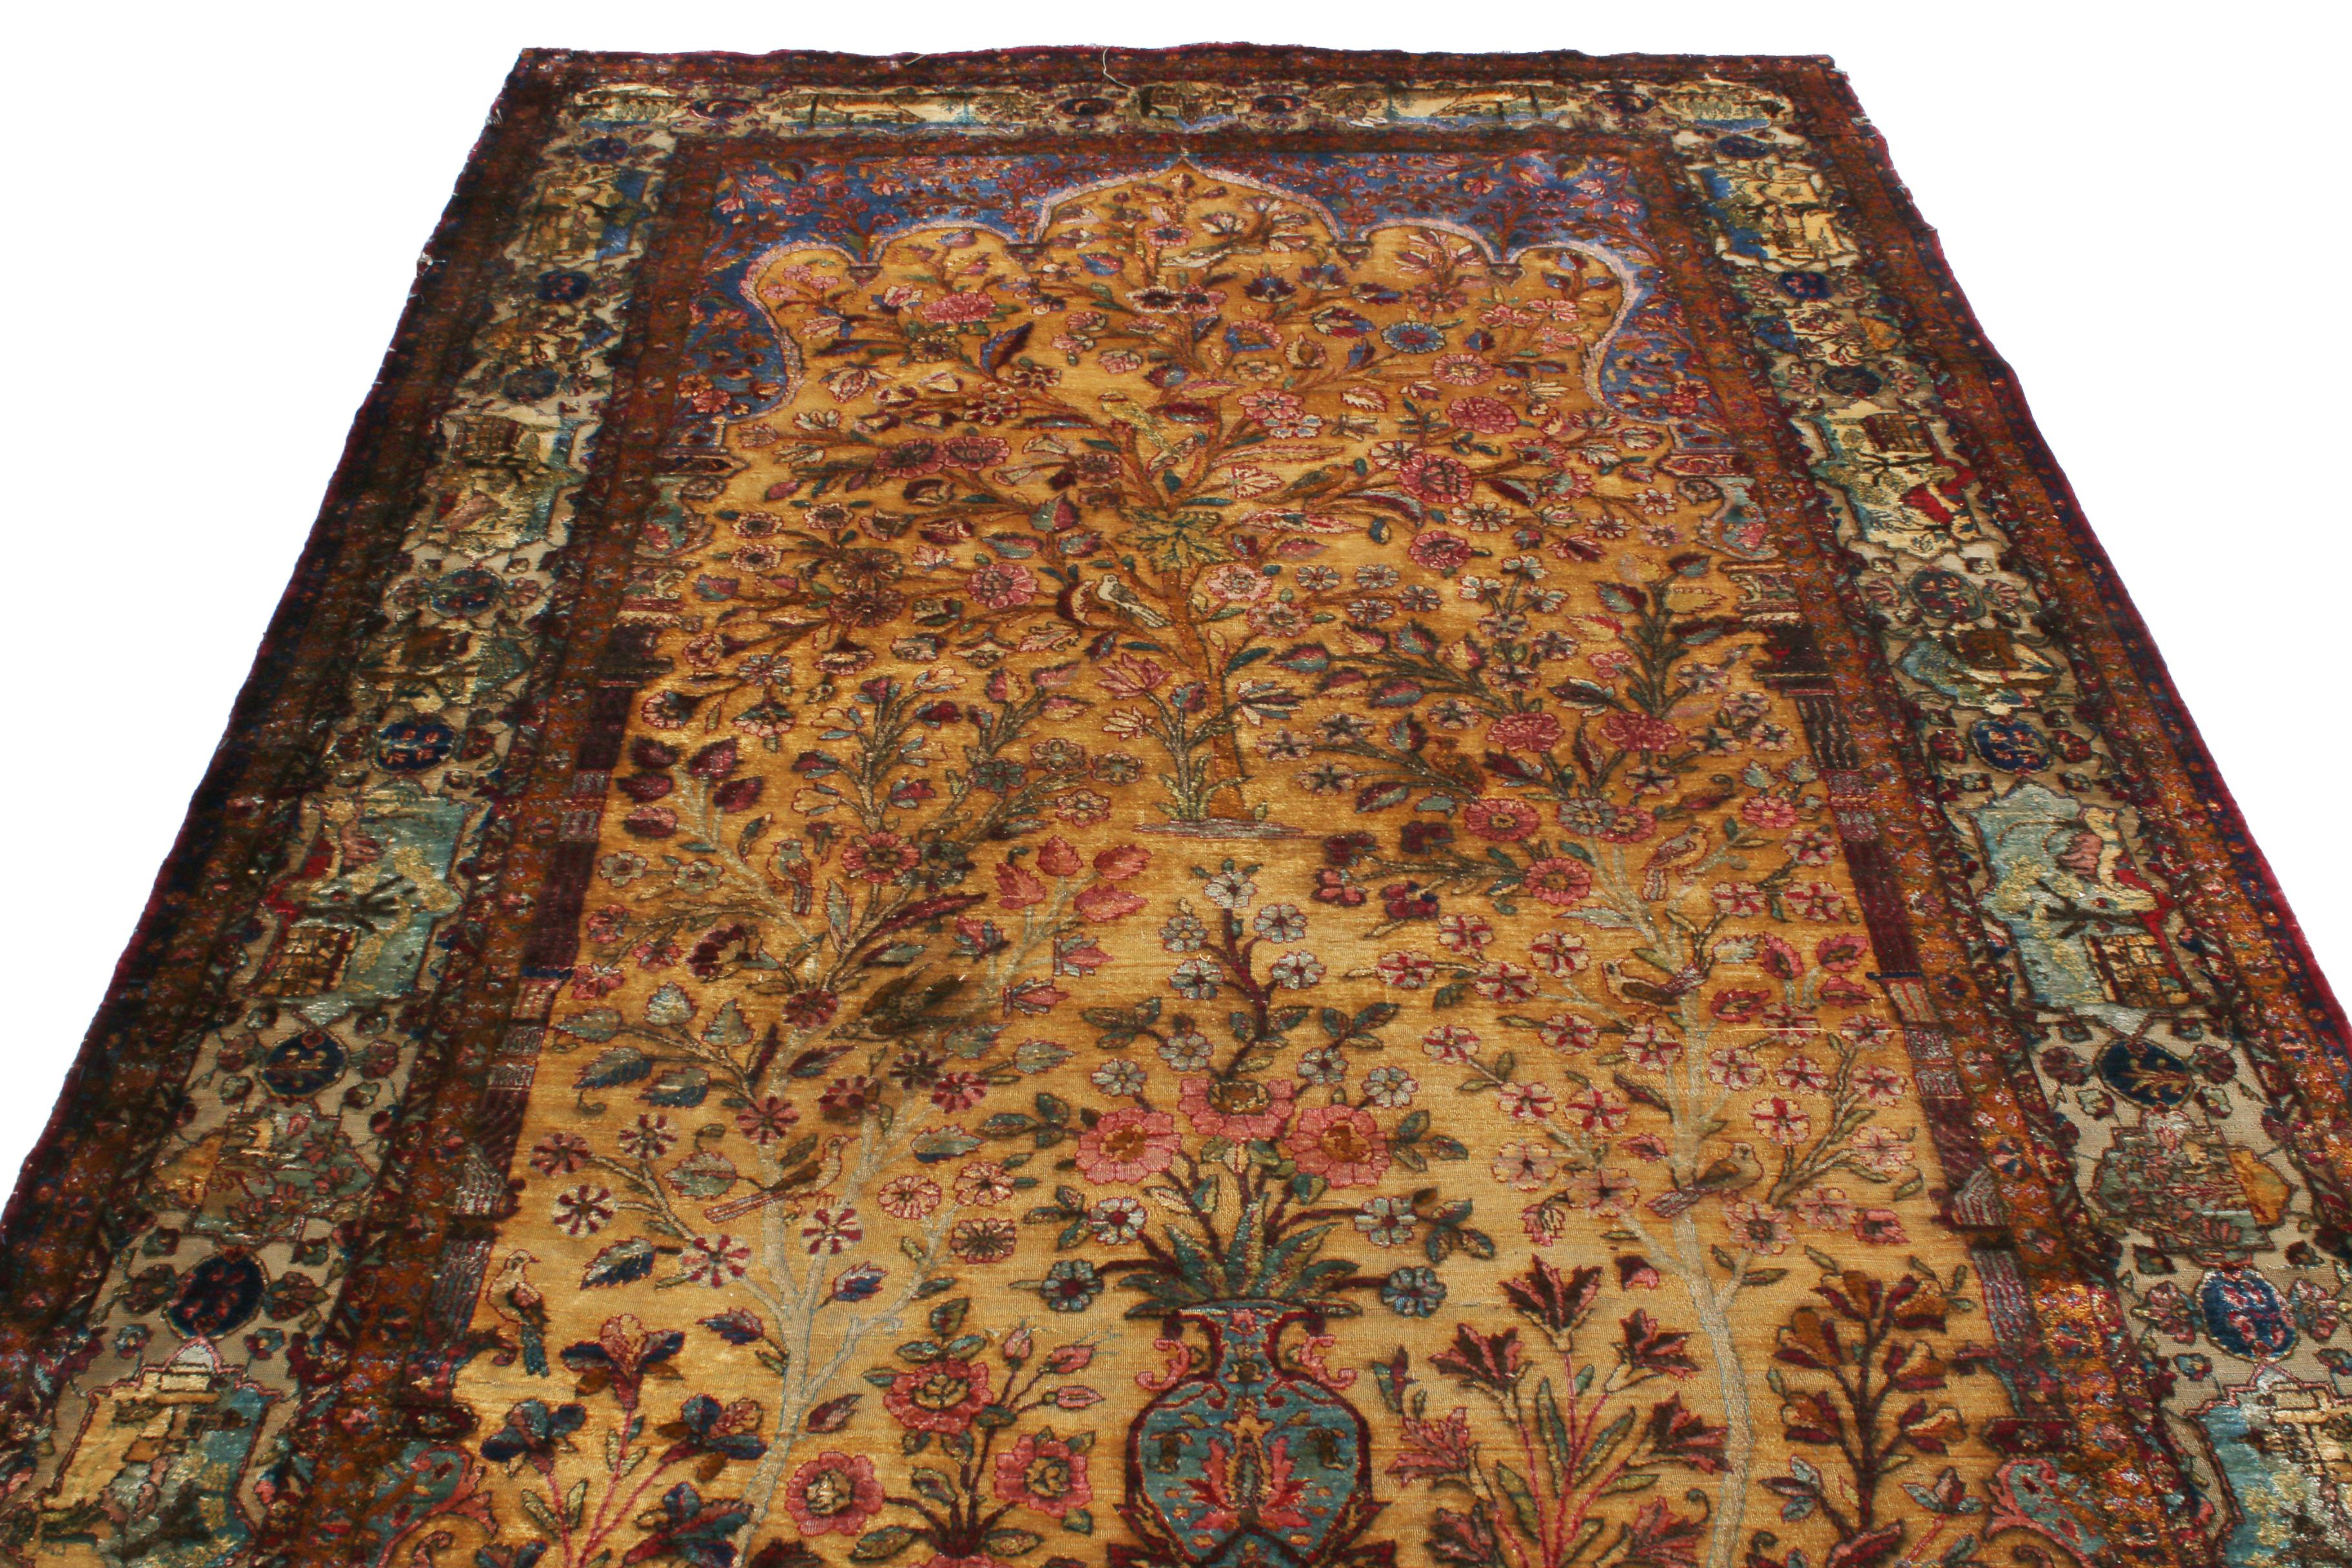 Originating from Persia between 1880-1900, this traditional antique Kashan rug utilizes brilliant hand knotted silk to accent a variety of lively colourways complementing its size and intricacy. The bold but graceful floral and animal imagery of the